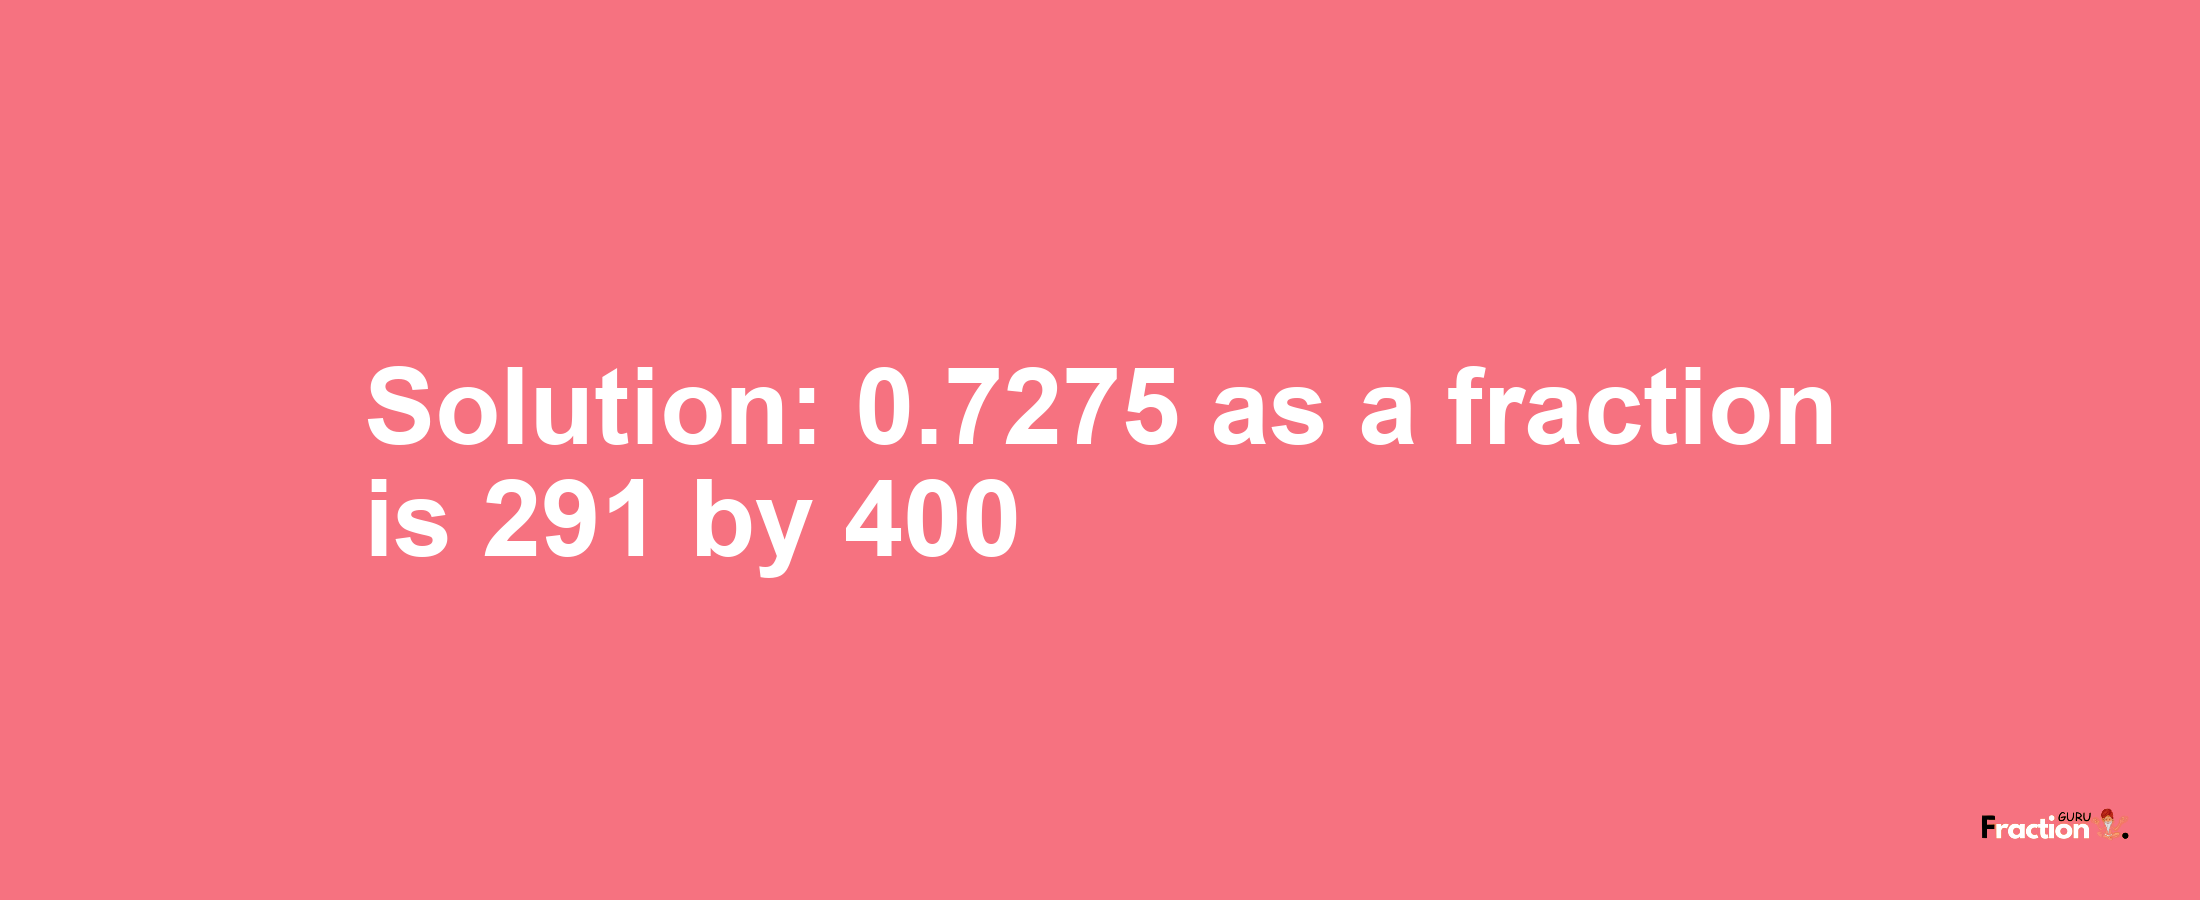 Solution:0.7275 as a fraction is 291/400